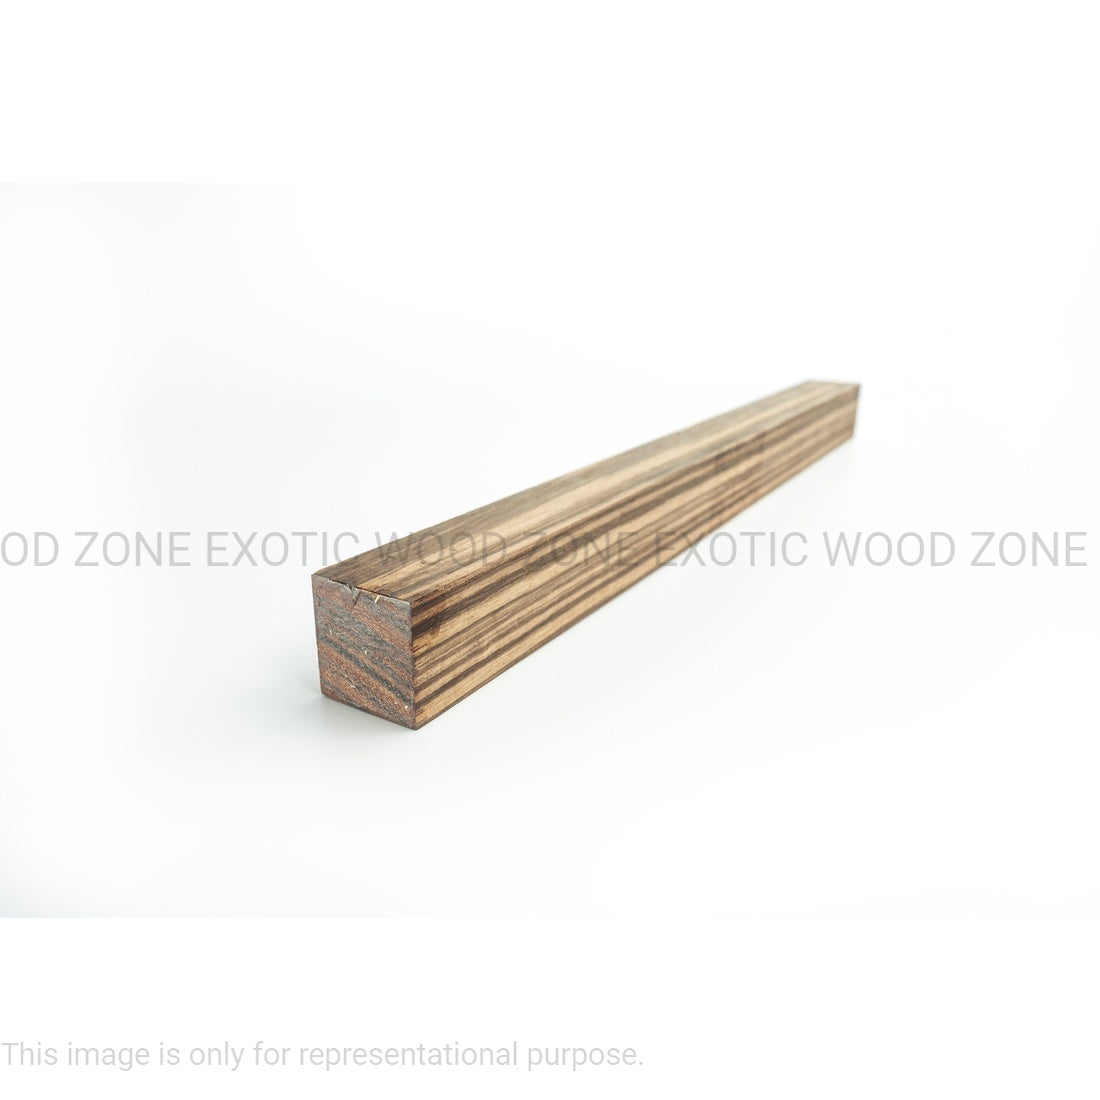 Zebrawood Hobbywood Blank 1&quot; x 1&quot; x 12&quot; inches Exotic Wood Zone